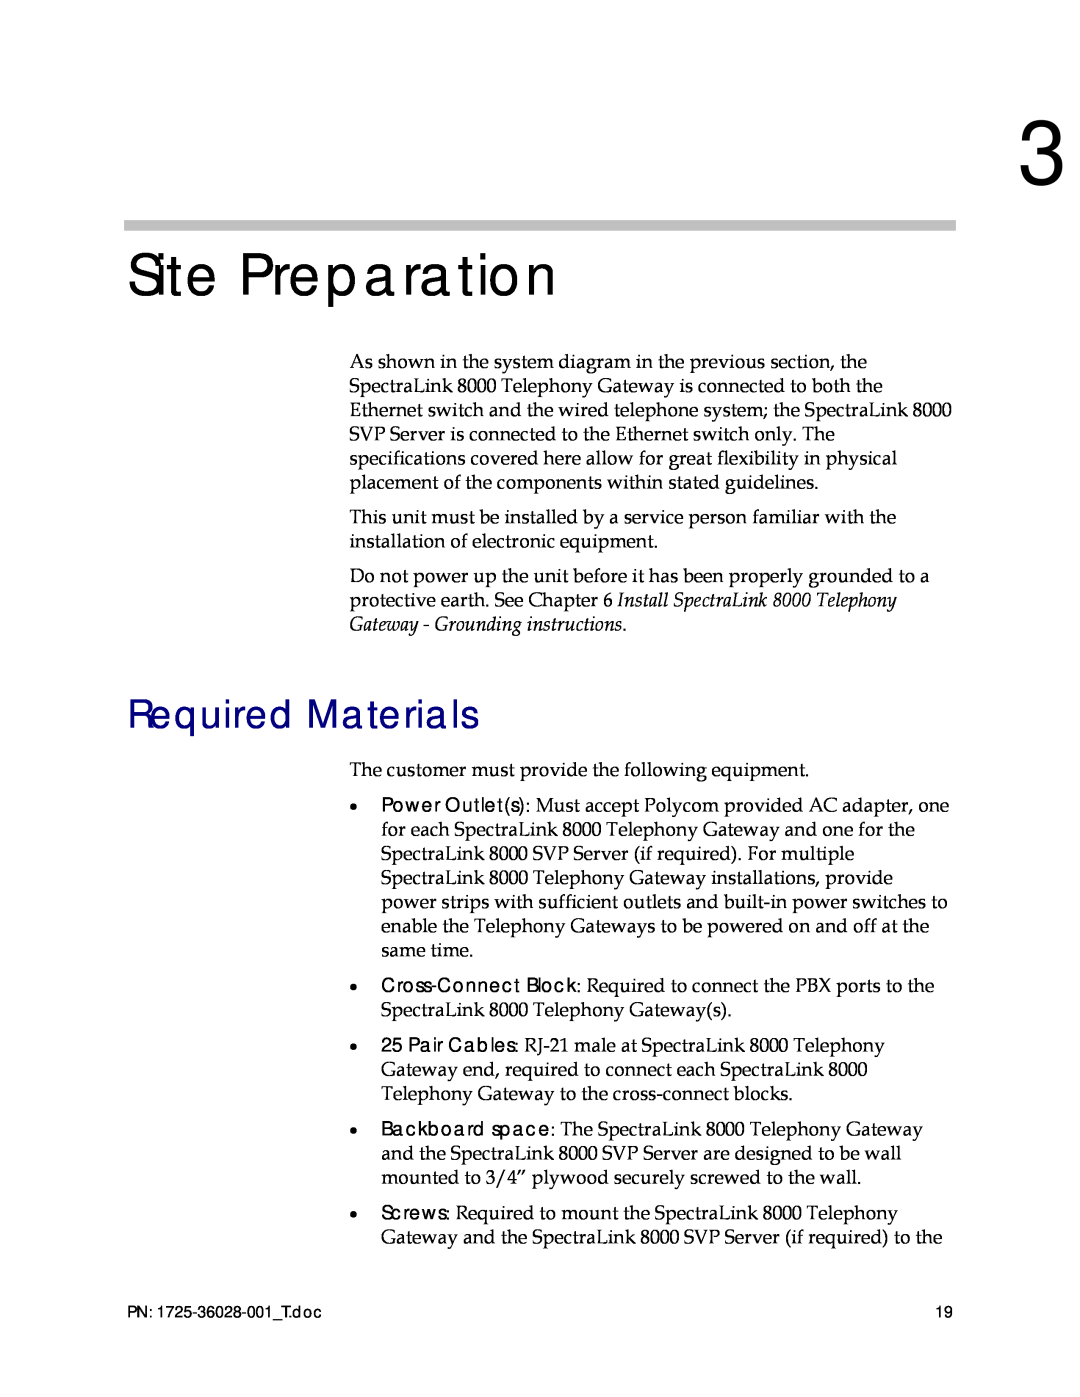 Polycom 1725-36028-001 manual Site Preparation, Required Materials 